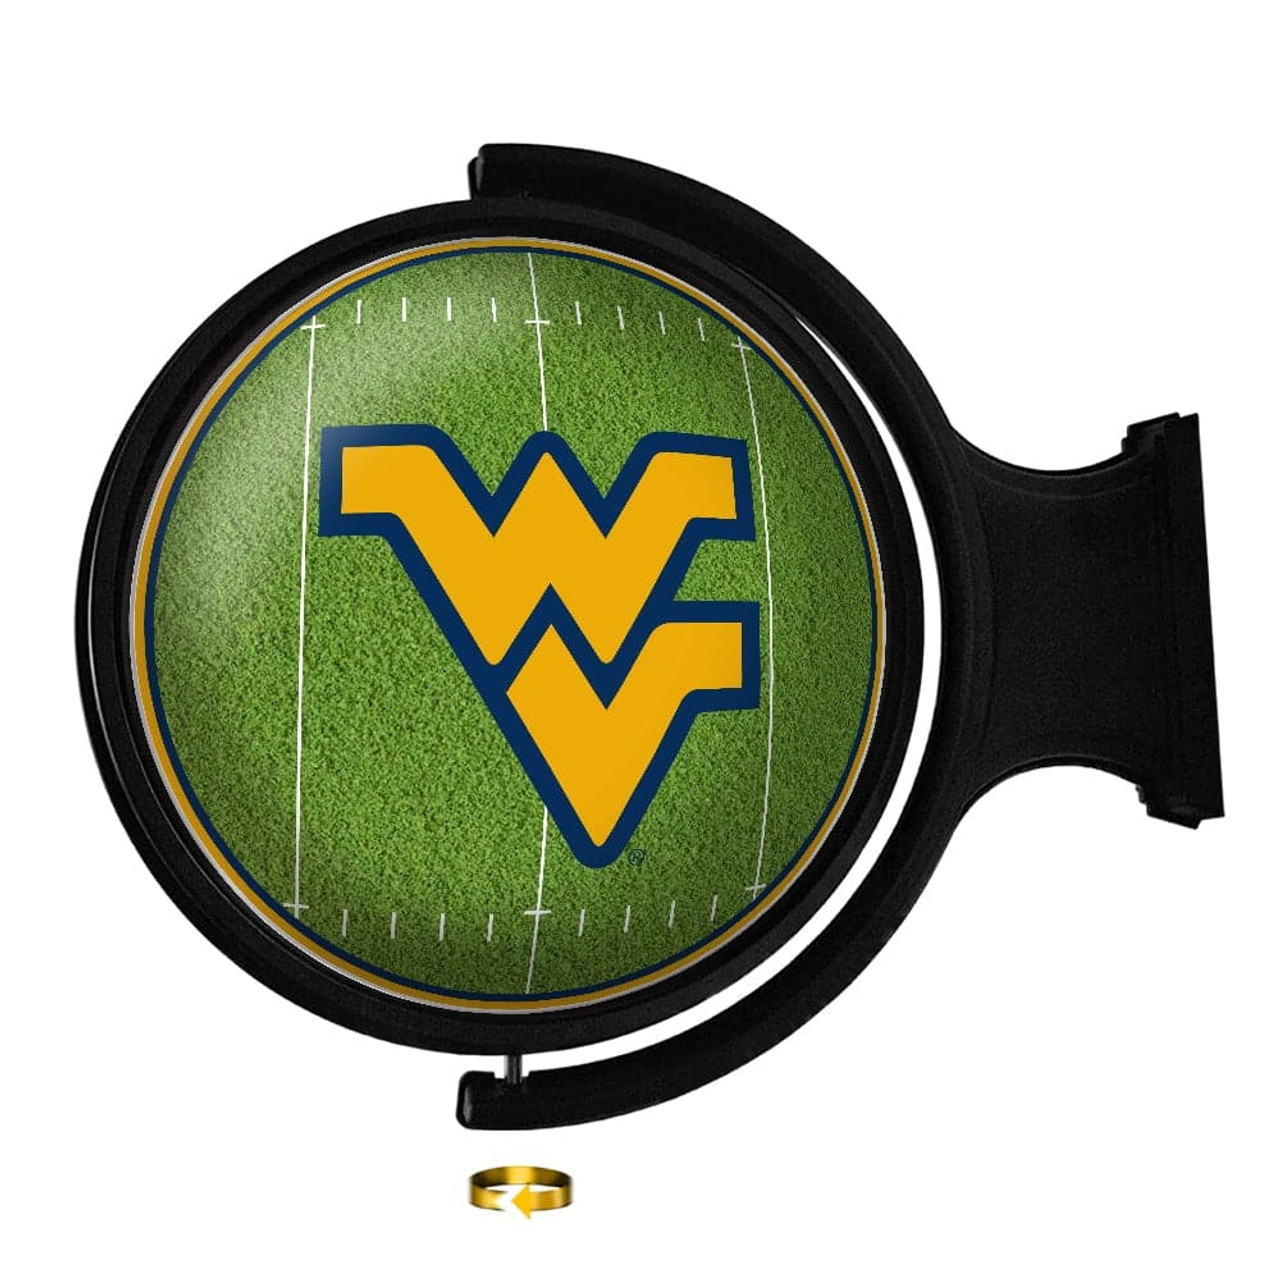 WV, West, Virginia, Mountaineers, On the 50, Football, Rotating, Spinning, Lighted, Wall, Sign, The Fan Brand, NCAA, NCWVIR-115-22, 689481028828